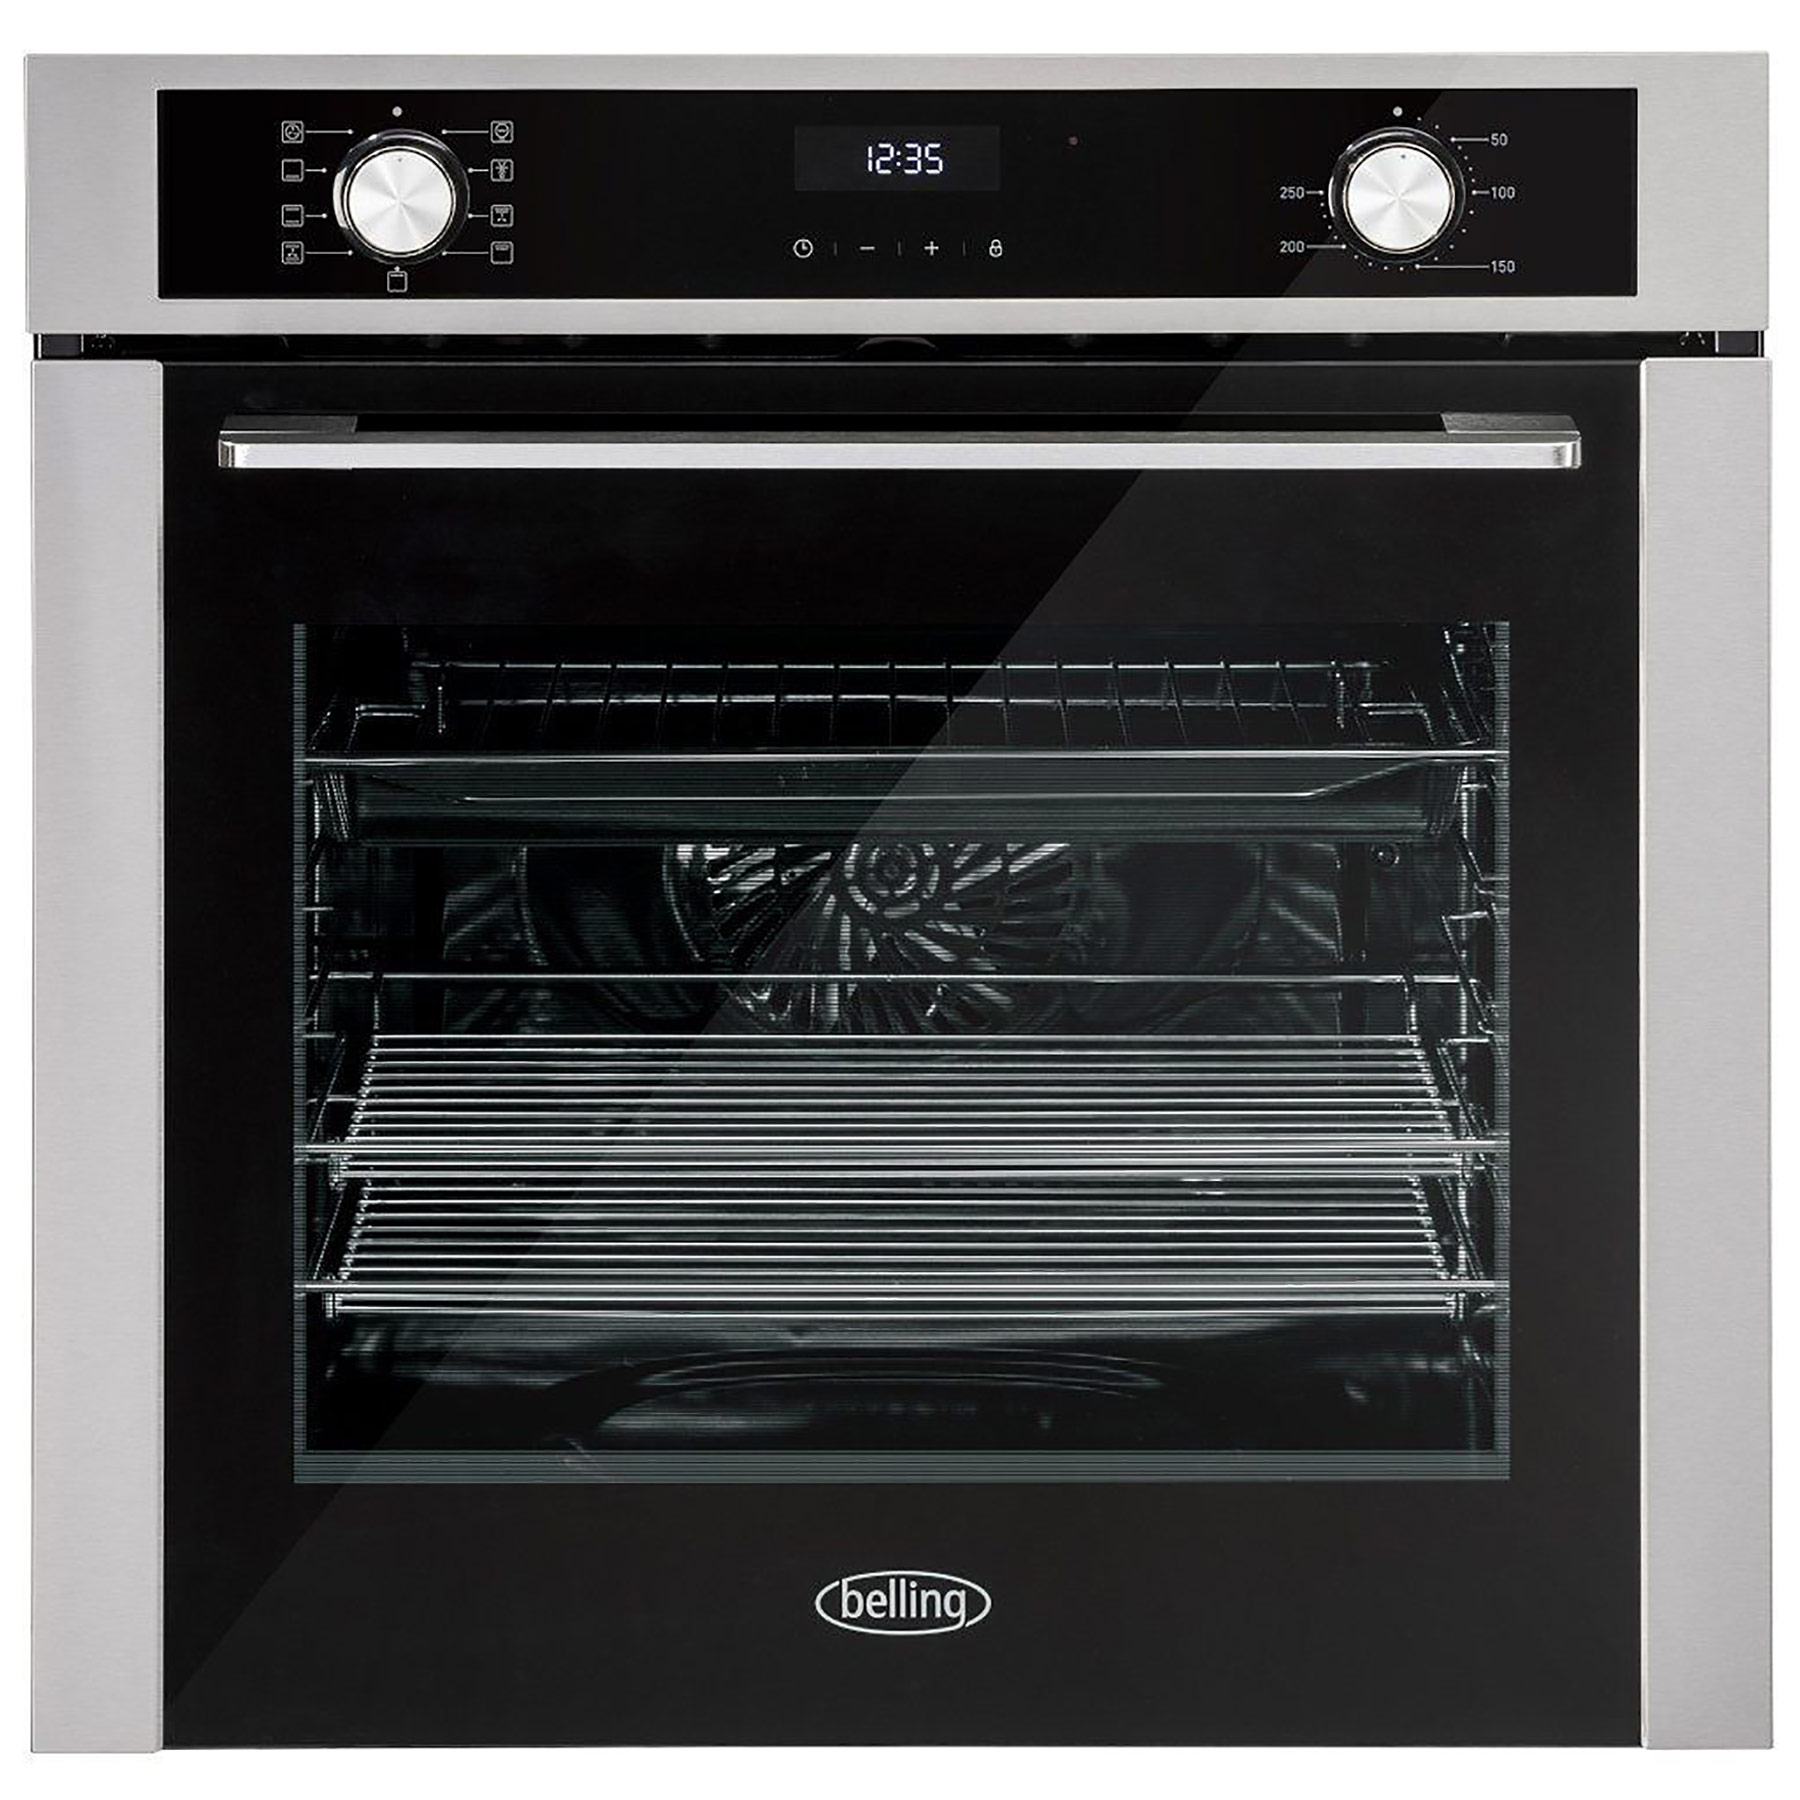 Image of Belling 444411627 Built In Electric Single Oven in St Steel 72L A Rate